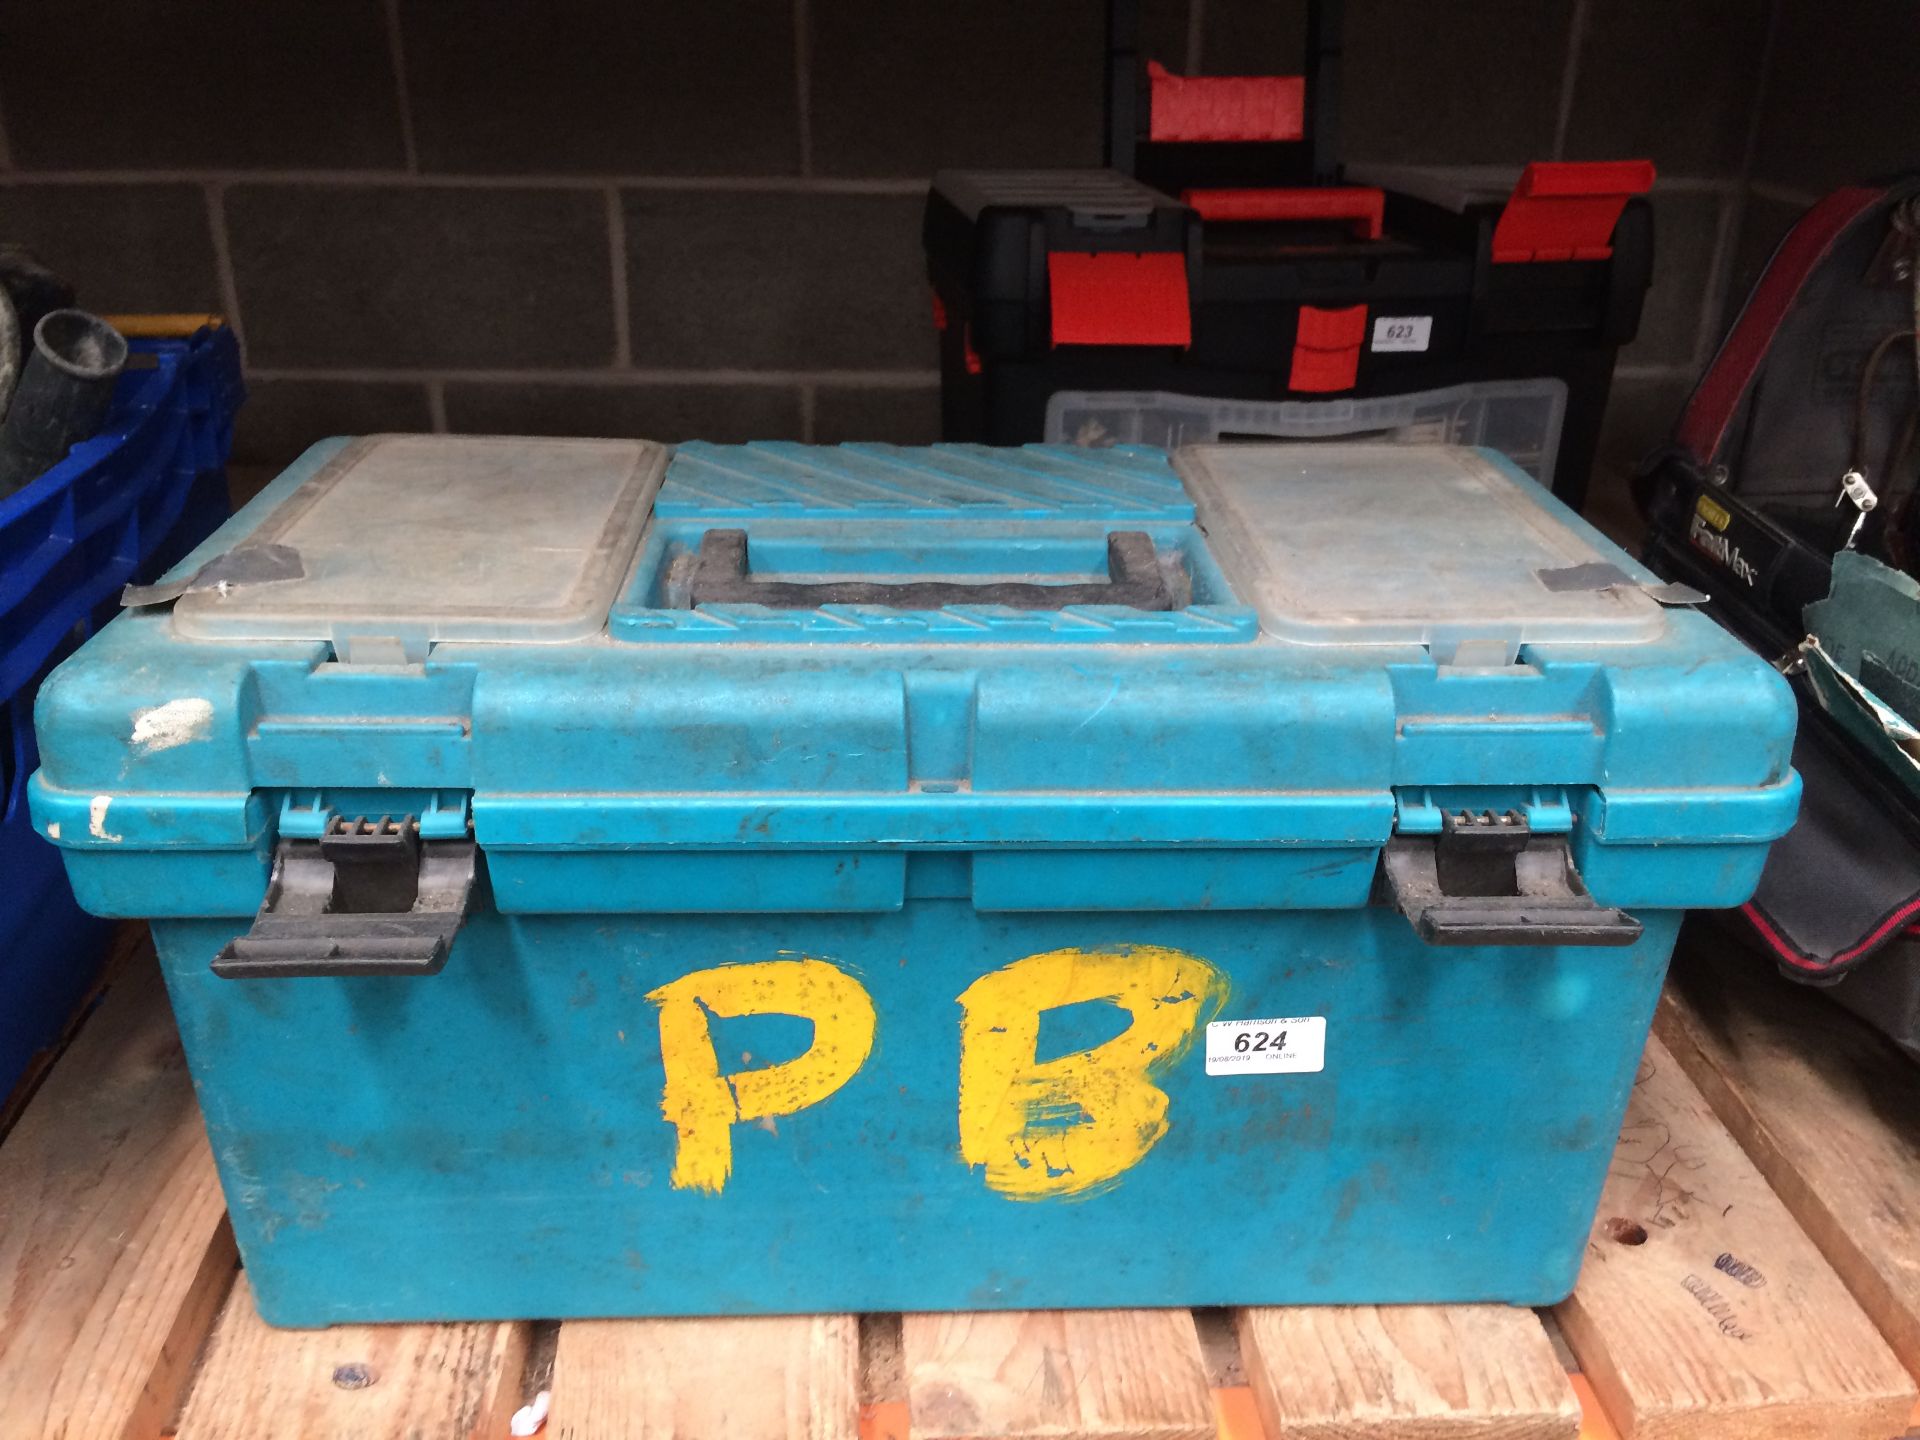 Green plastic toolbox and contents - hammers, screwdrivers etc.